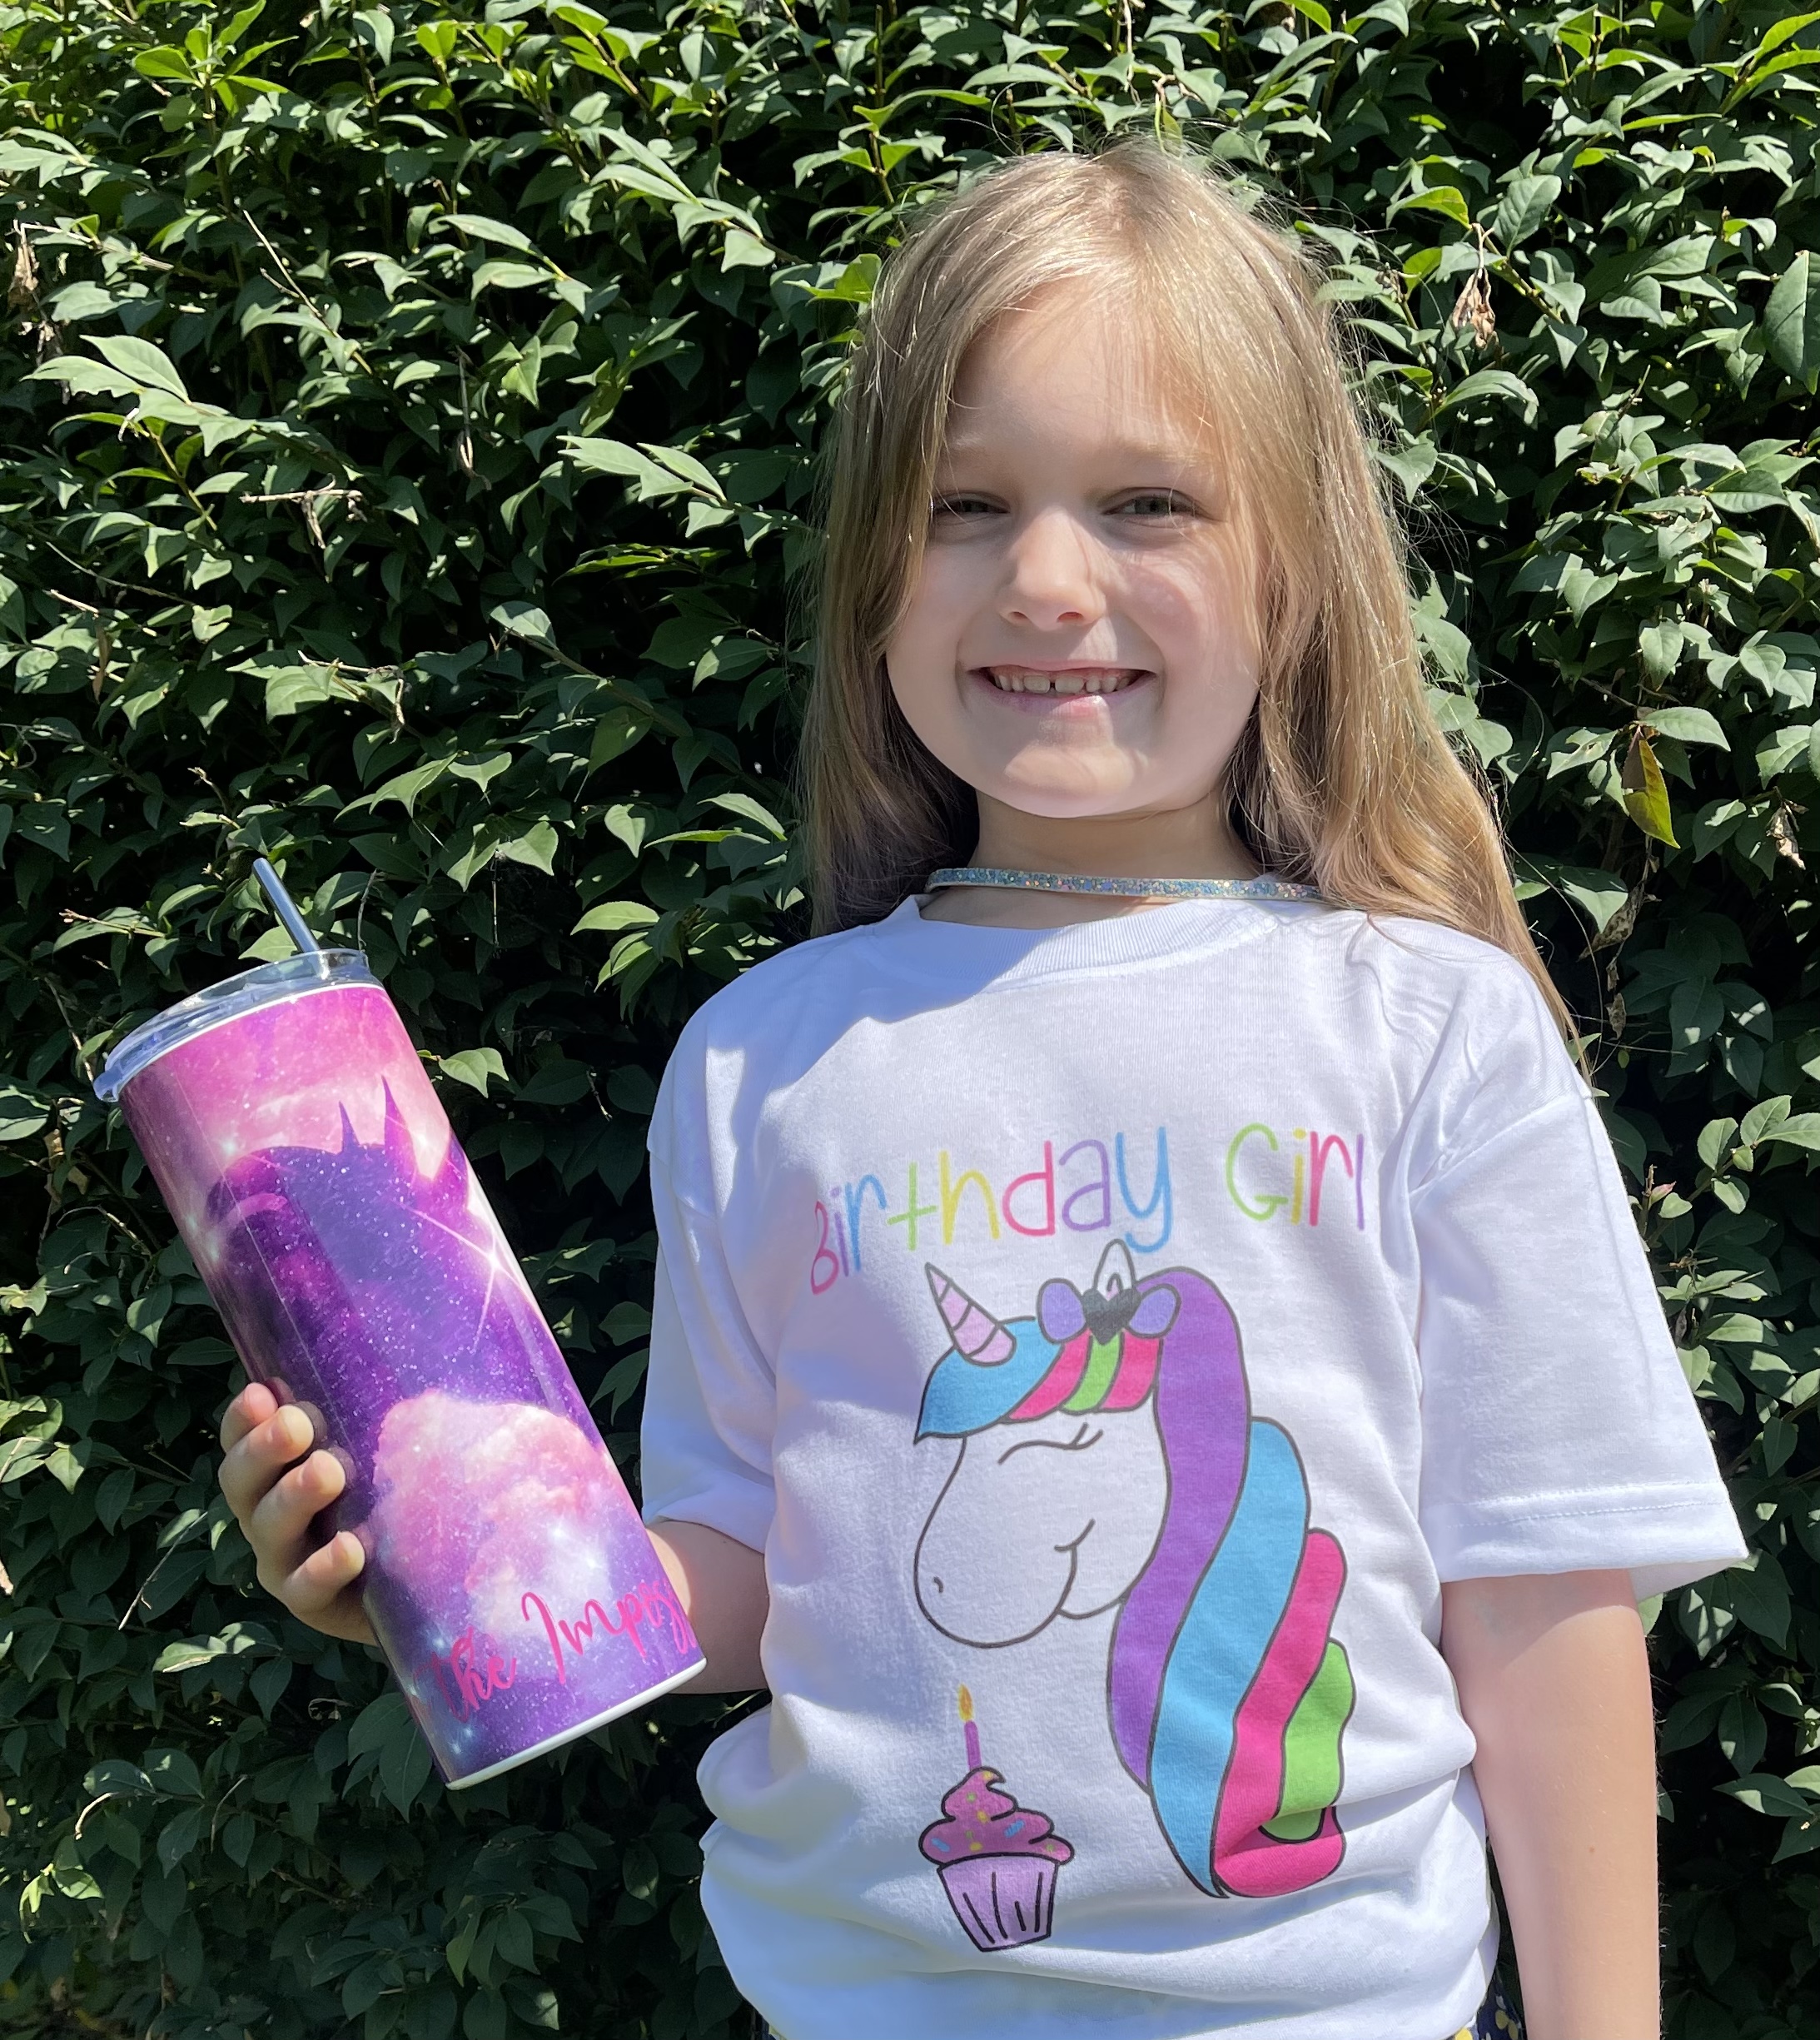 My daughter wanted a shirt and tumbler for her unicorn themed birthday party.